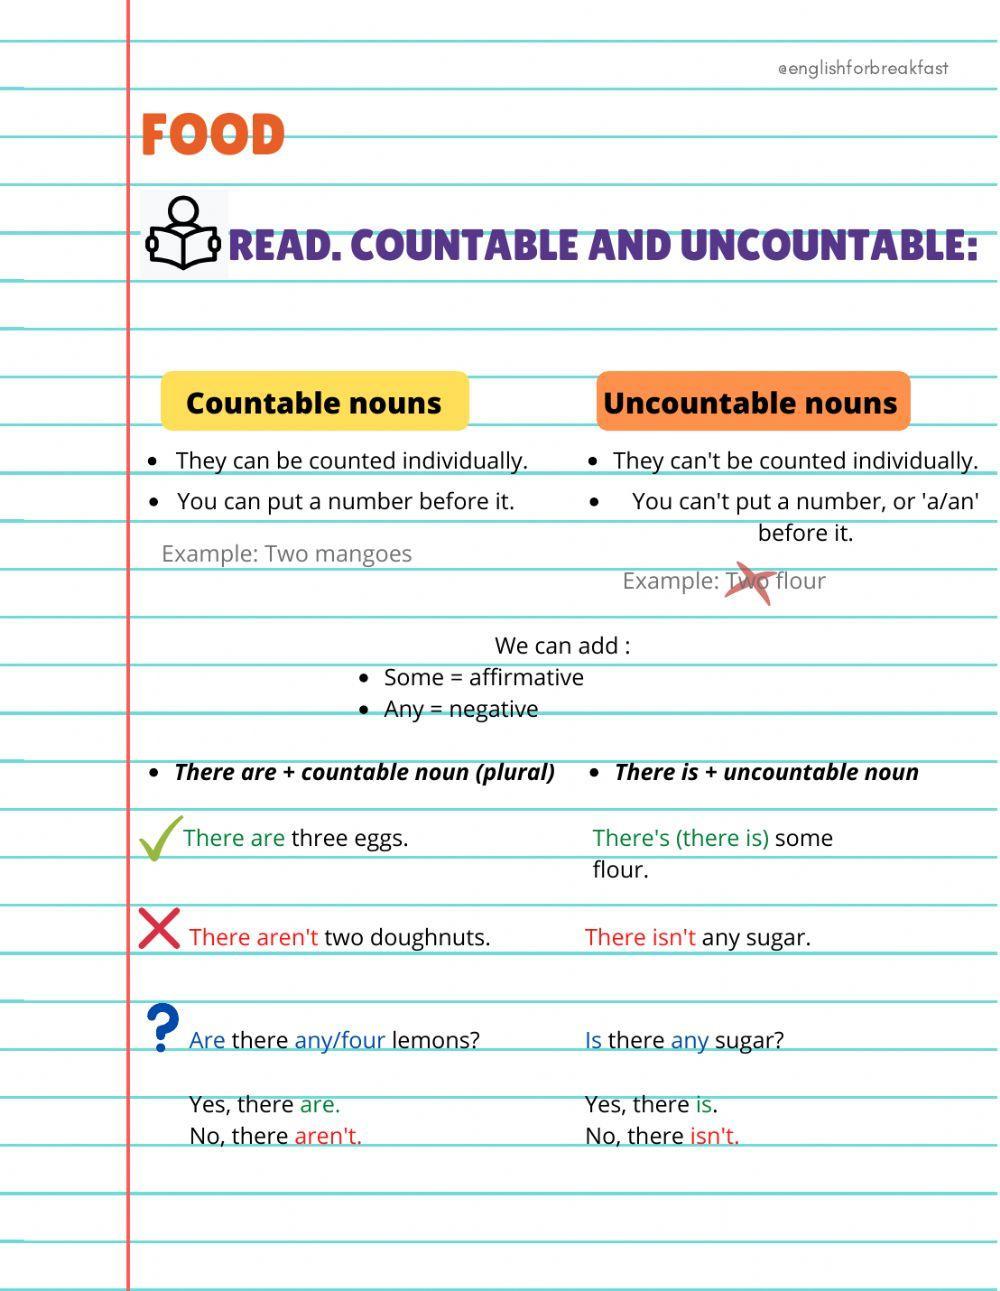 Food. Countable and uncountable nouns